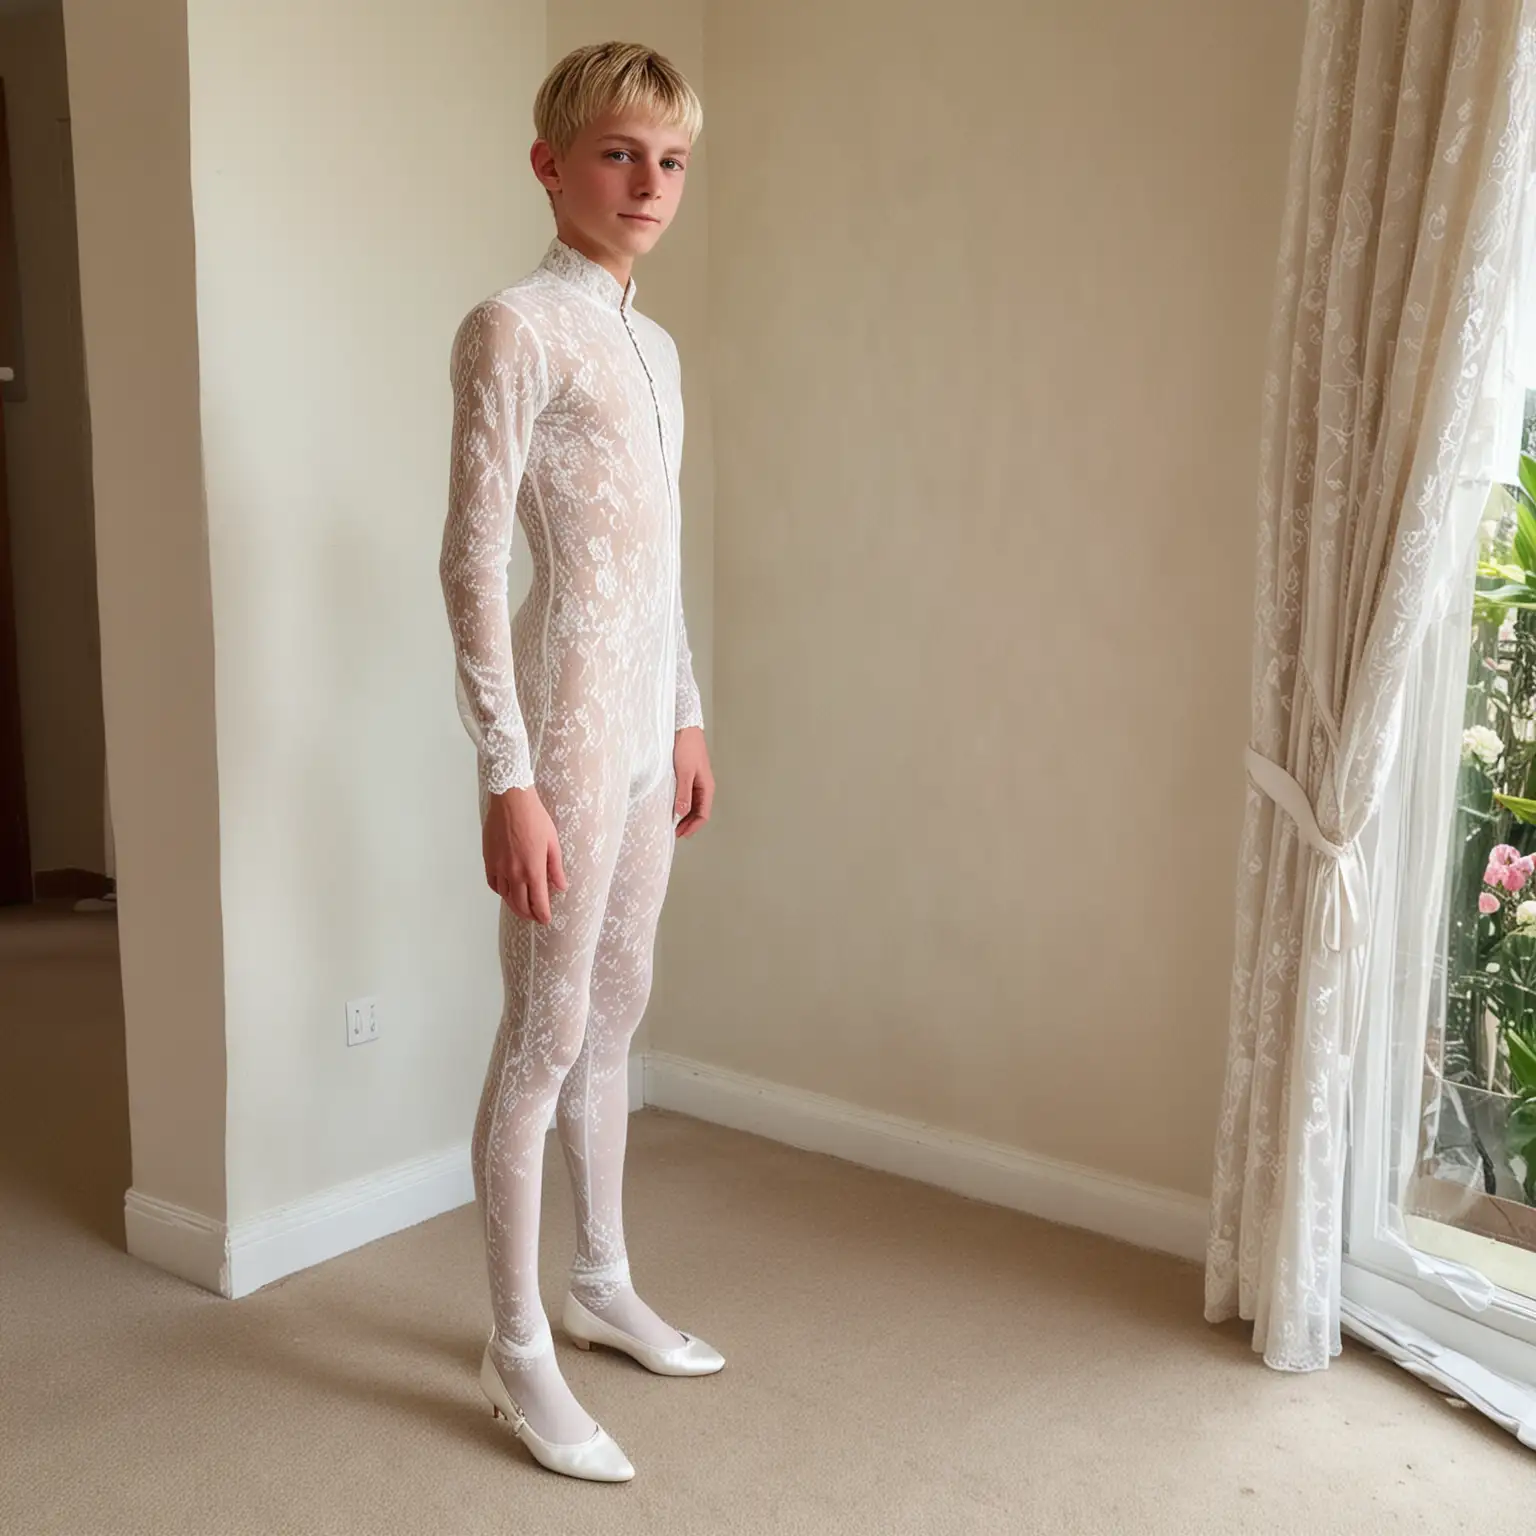 Slim-Teenage-Boy-in-White-Lace-Catsuit-at-Wedding